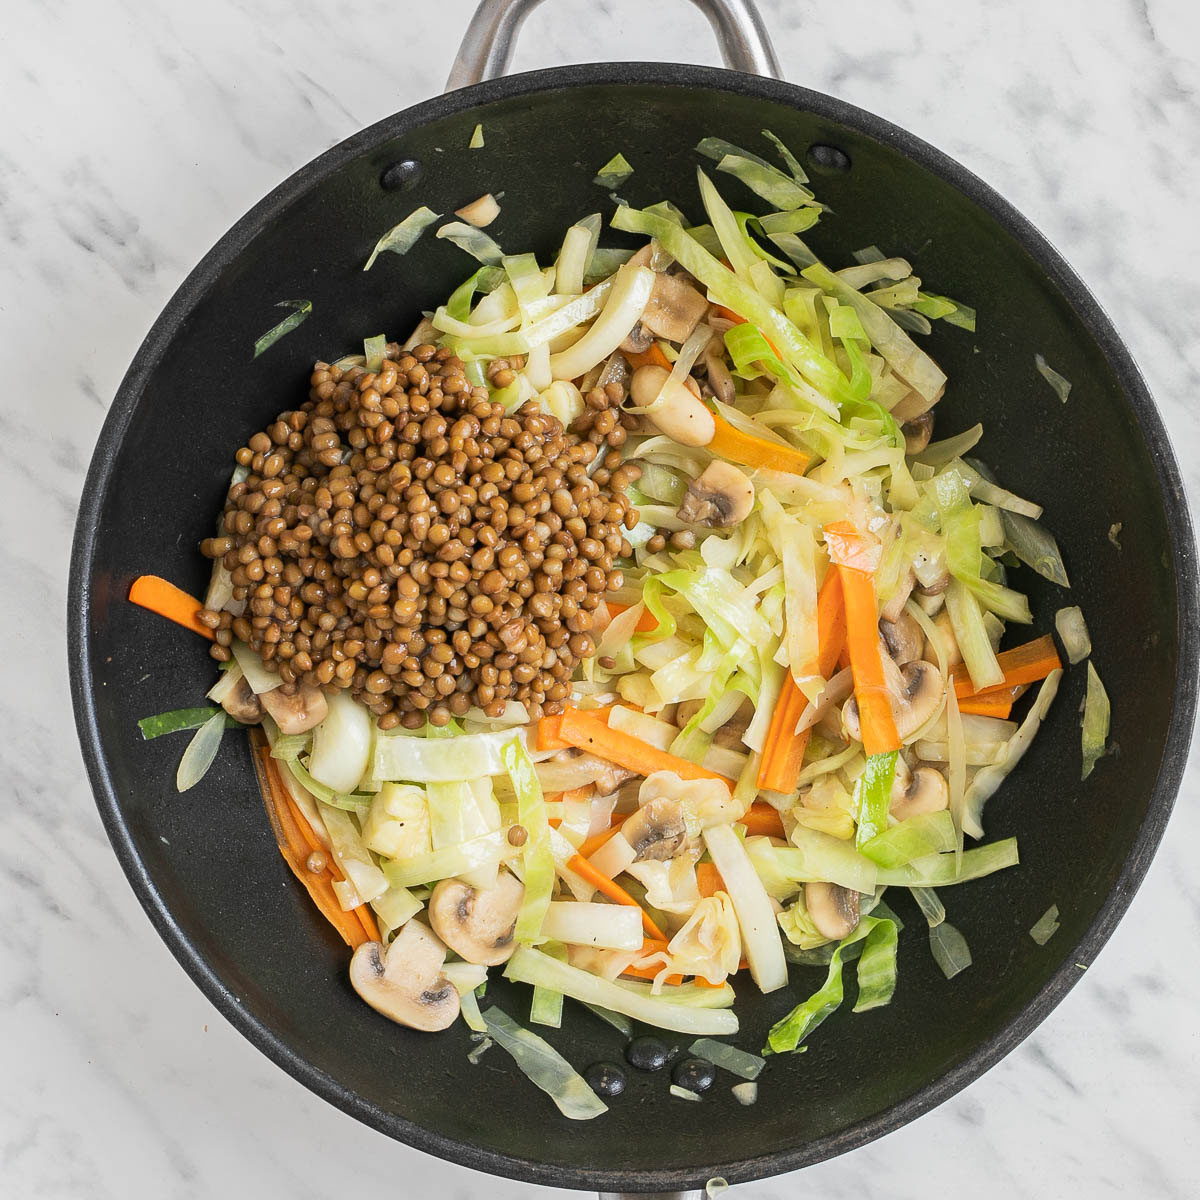 A wok with a mix of sliced mushrooms, shredded cabbage and sliced carrots. A small heap of brown lentils are added.